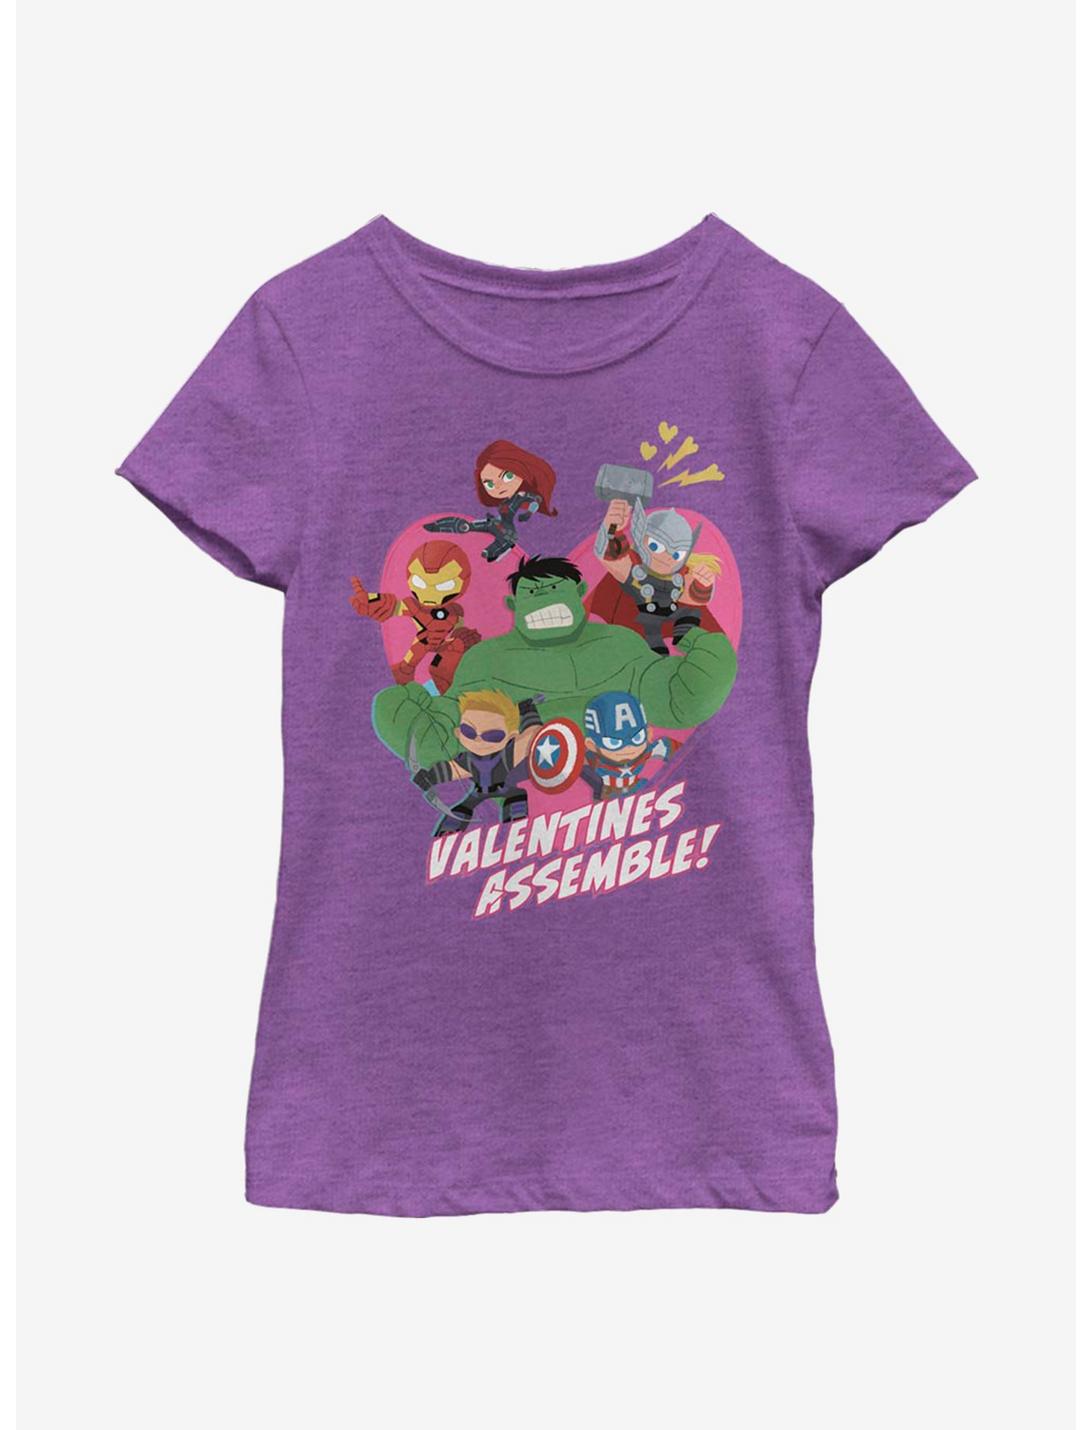 Marvel Avengers Valentines Assemble Youth Girls T-Shirt, PURPLE BERRY, hi-res